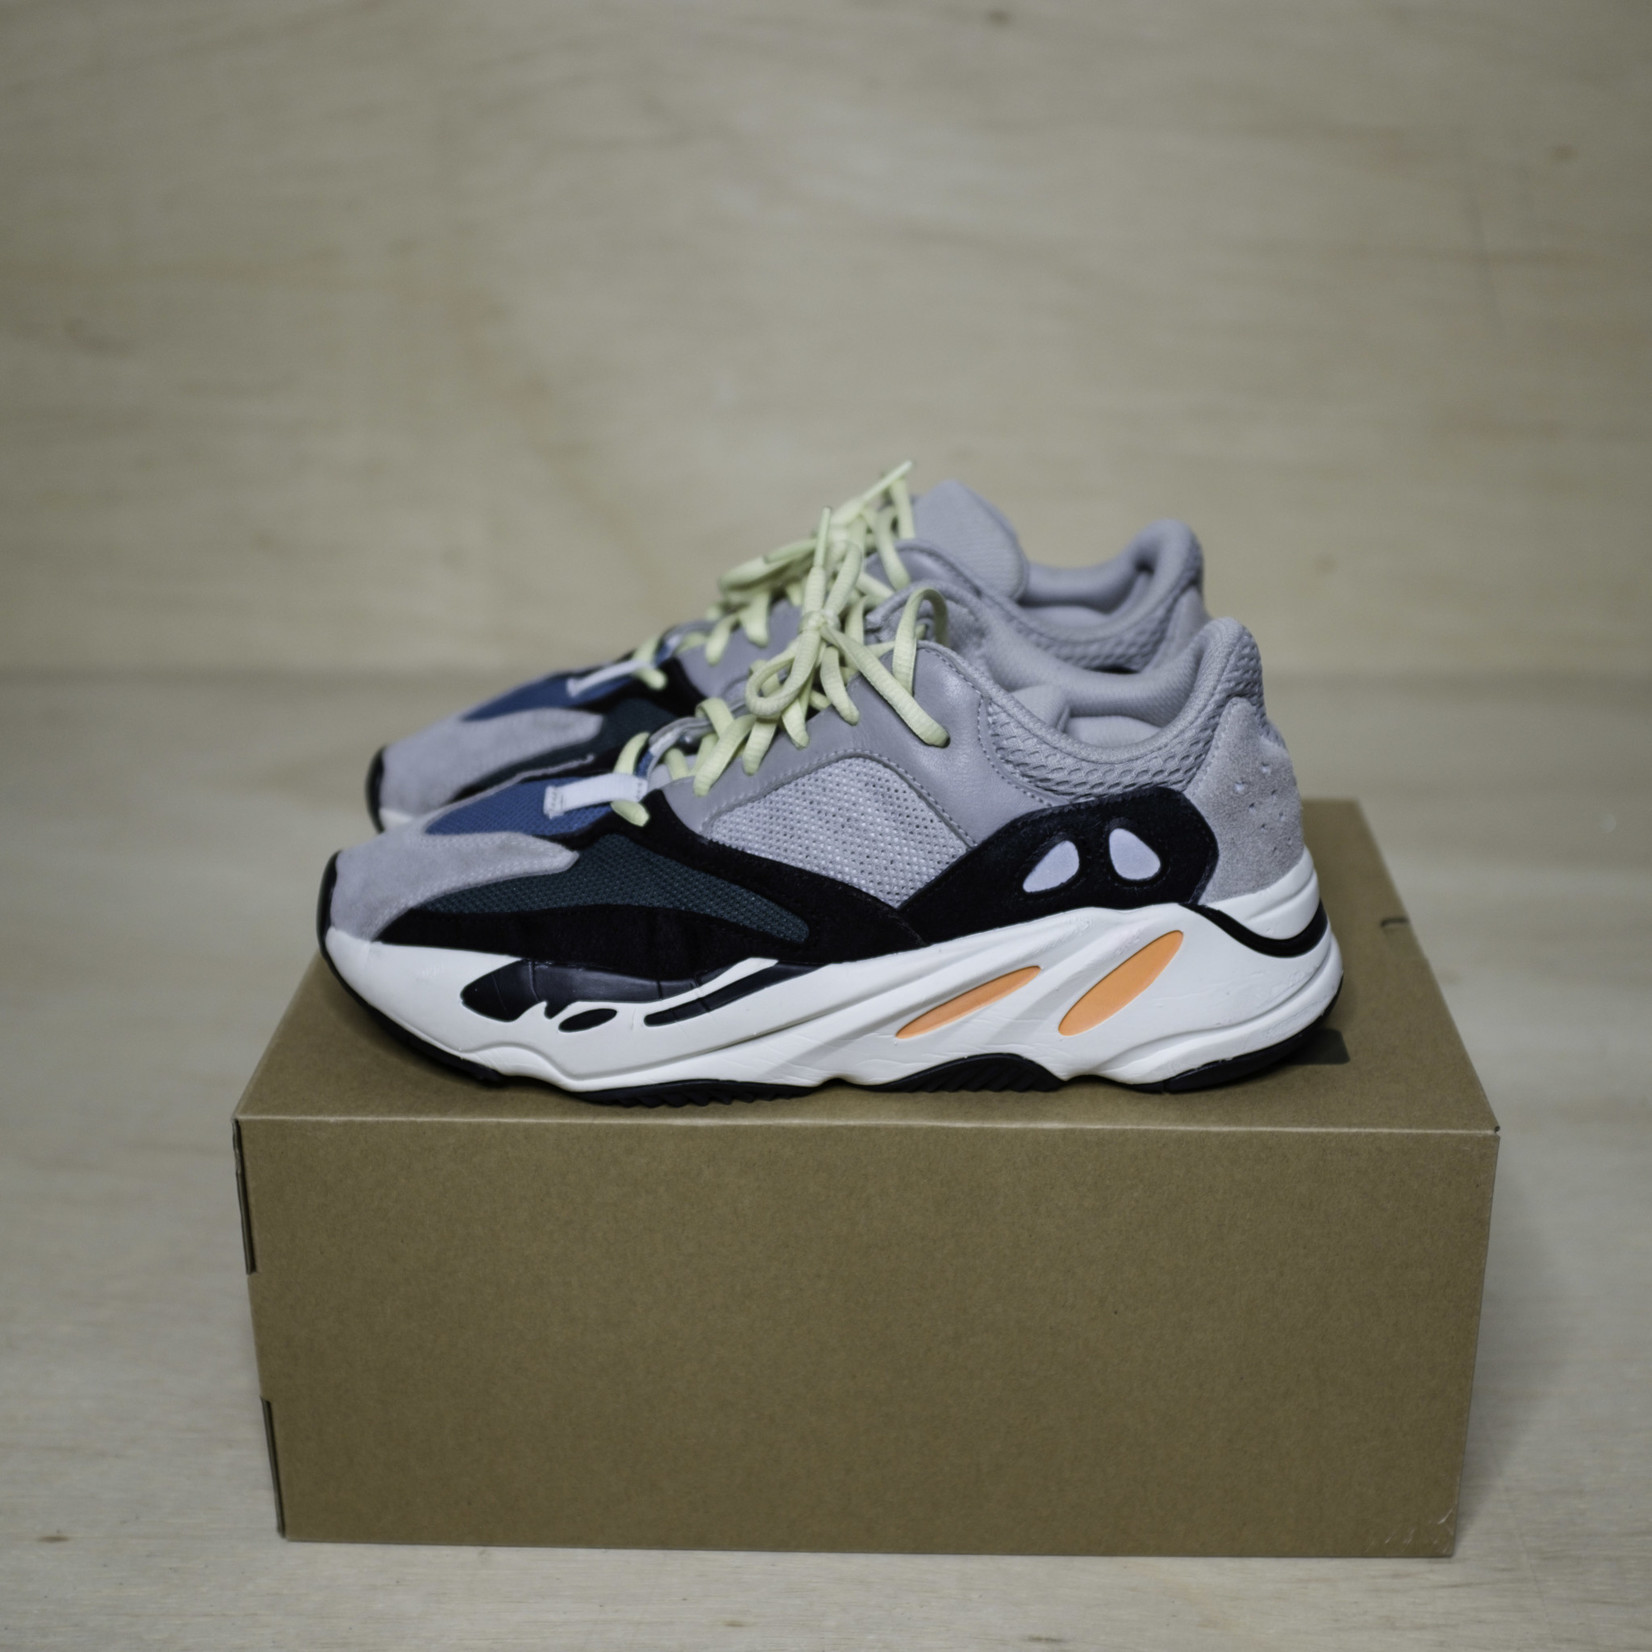 Adidas adidas Yeezy Boost 700 Wave Runner Solid Grey Size 11, DS BRAND NEW